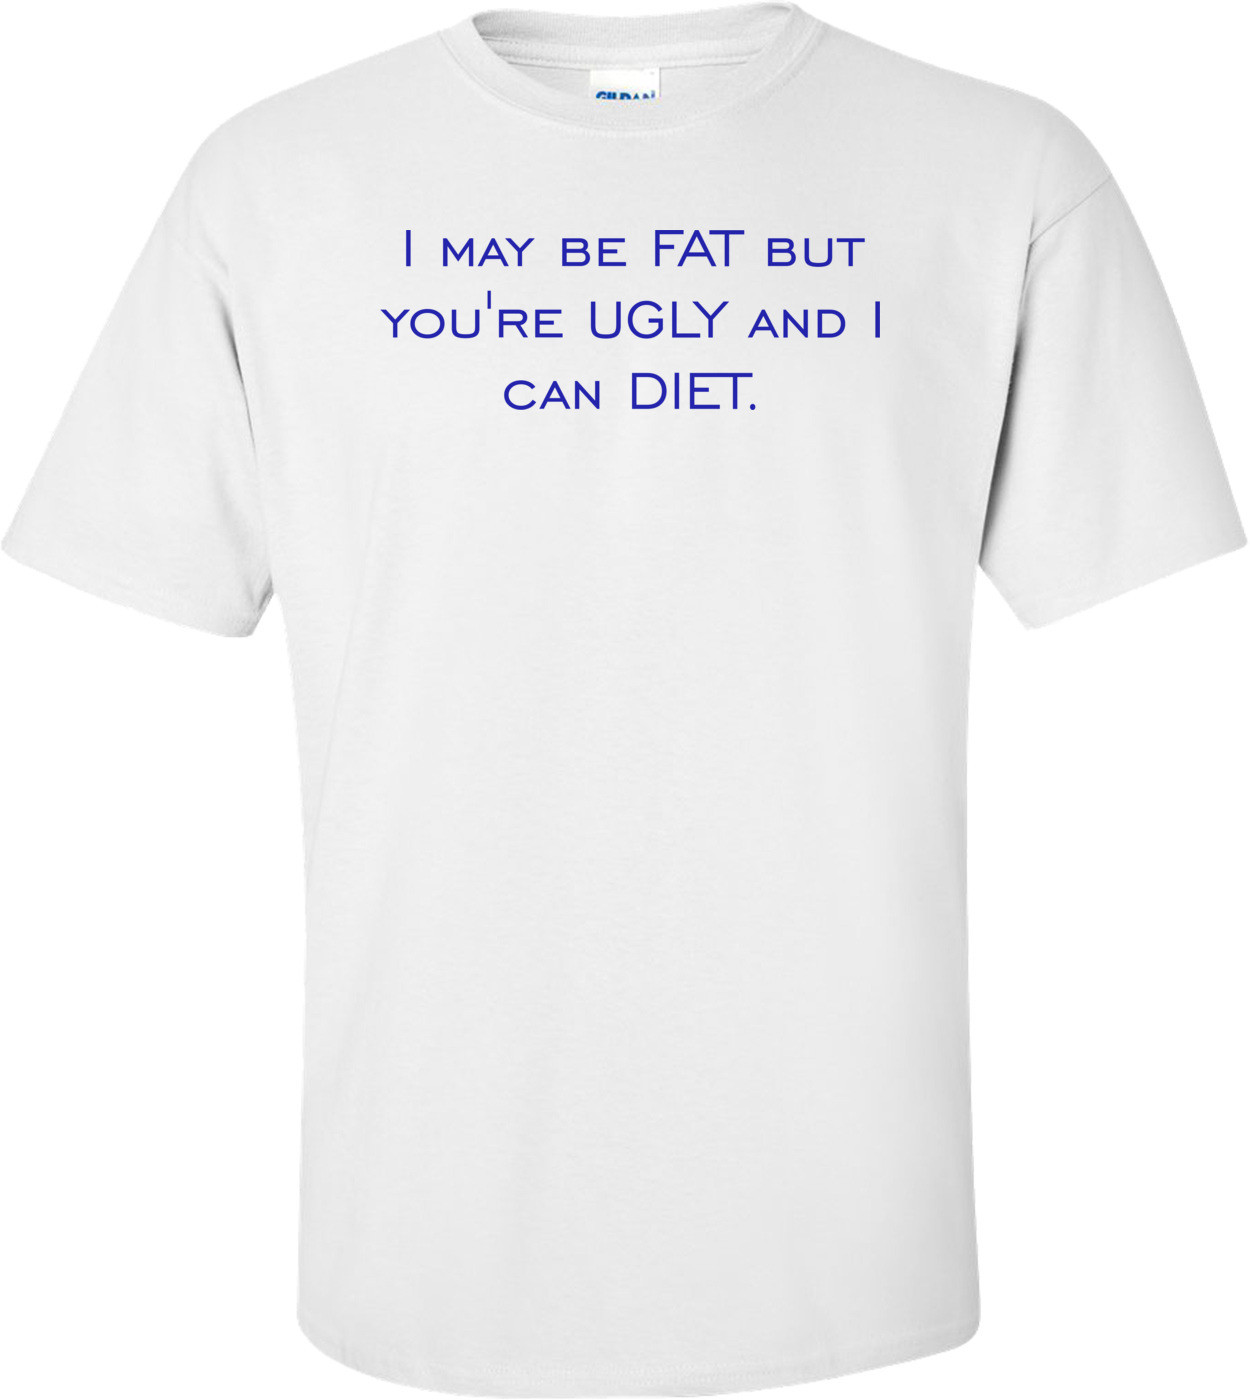 I may be FAT but you're UGLY and I can DIET. Shirt